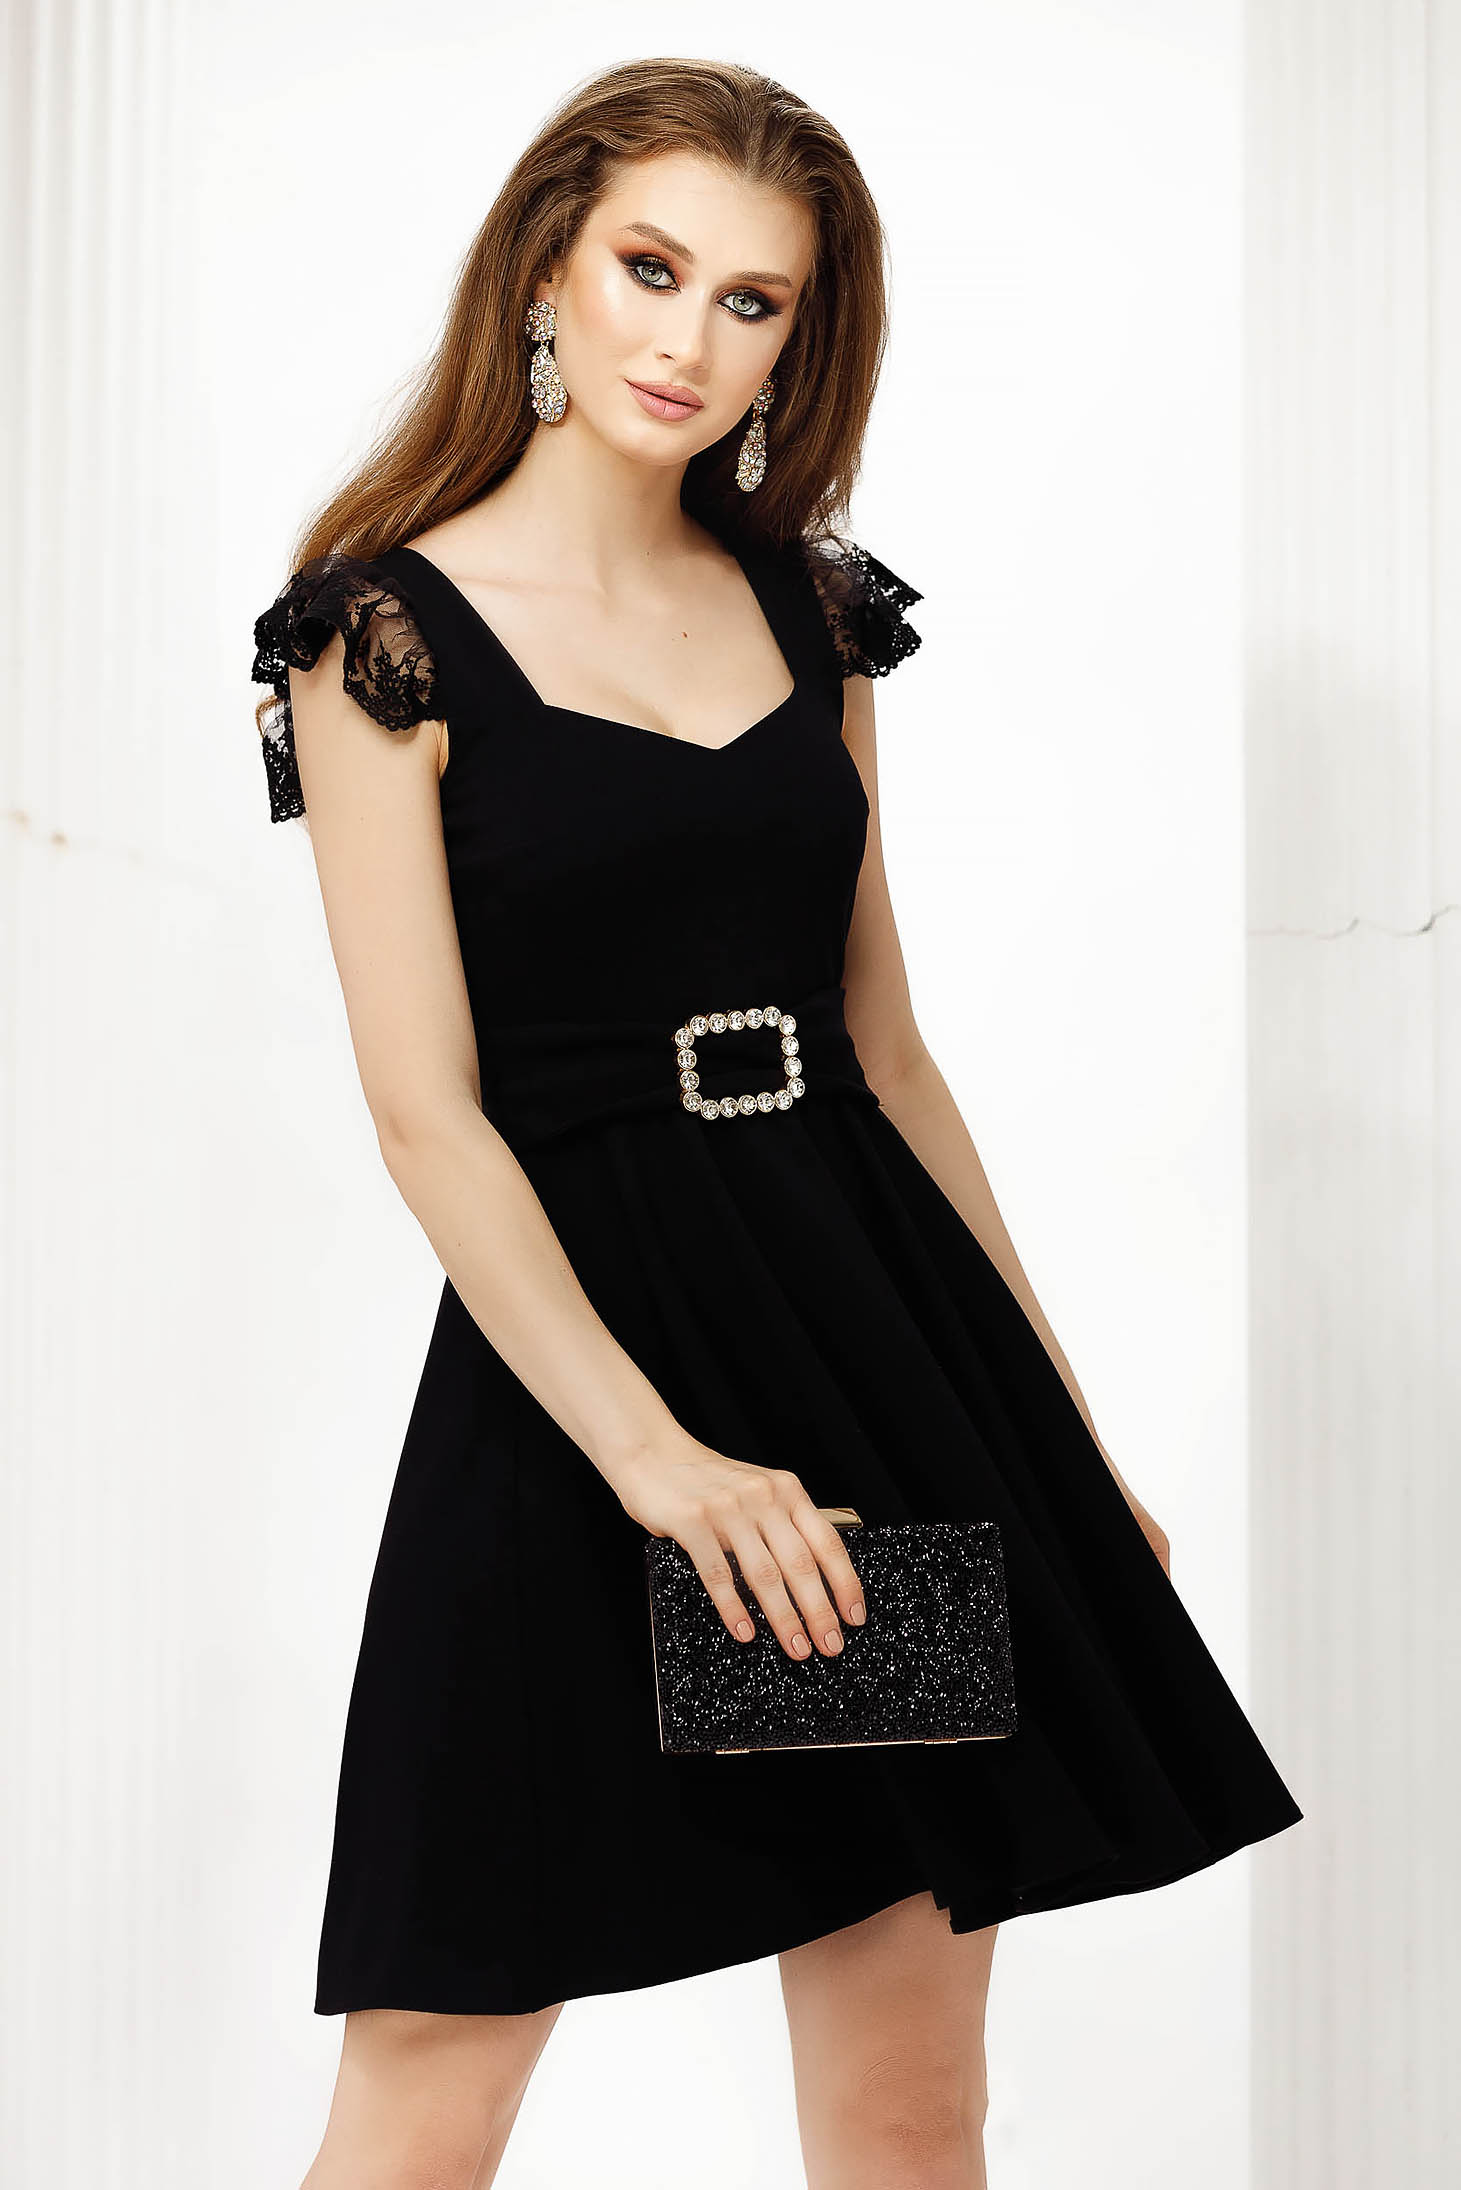 Black dress thin fabric with laced sleeves cloche short cut occasional